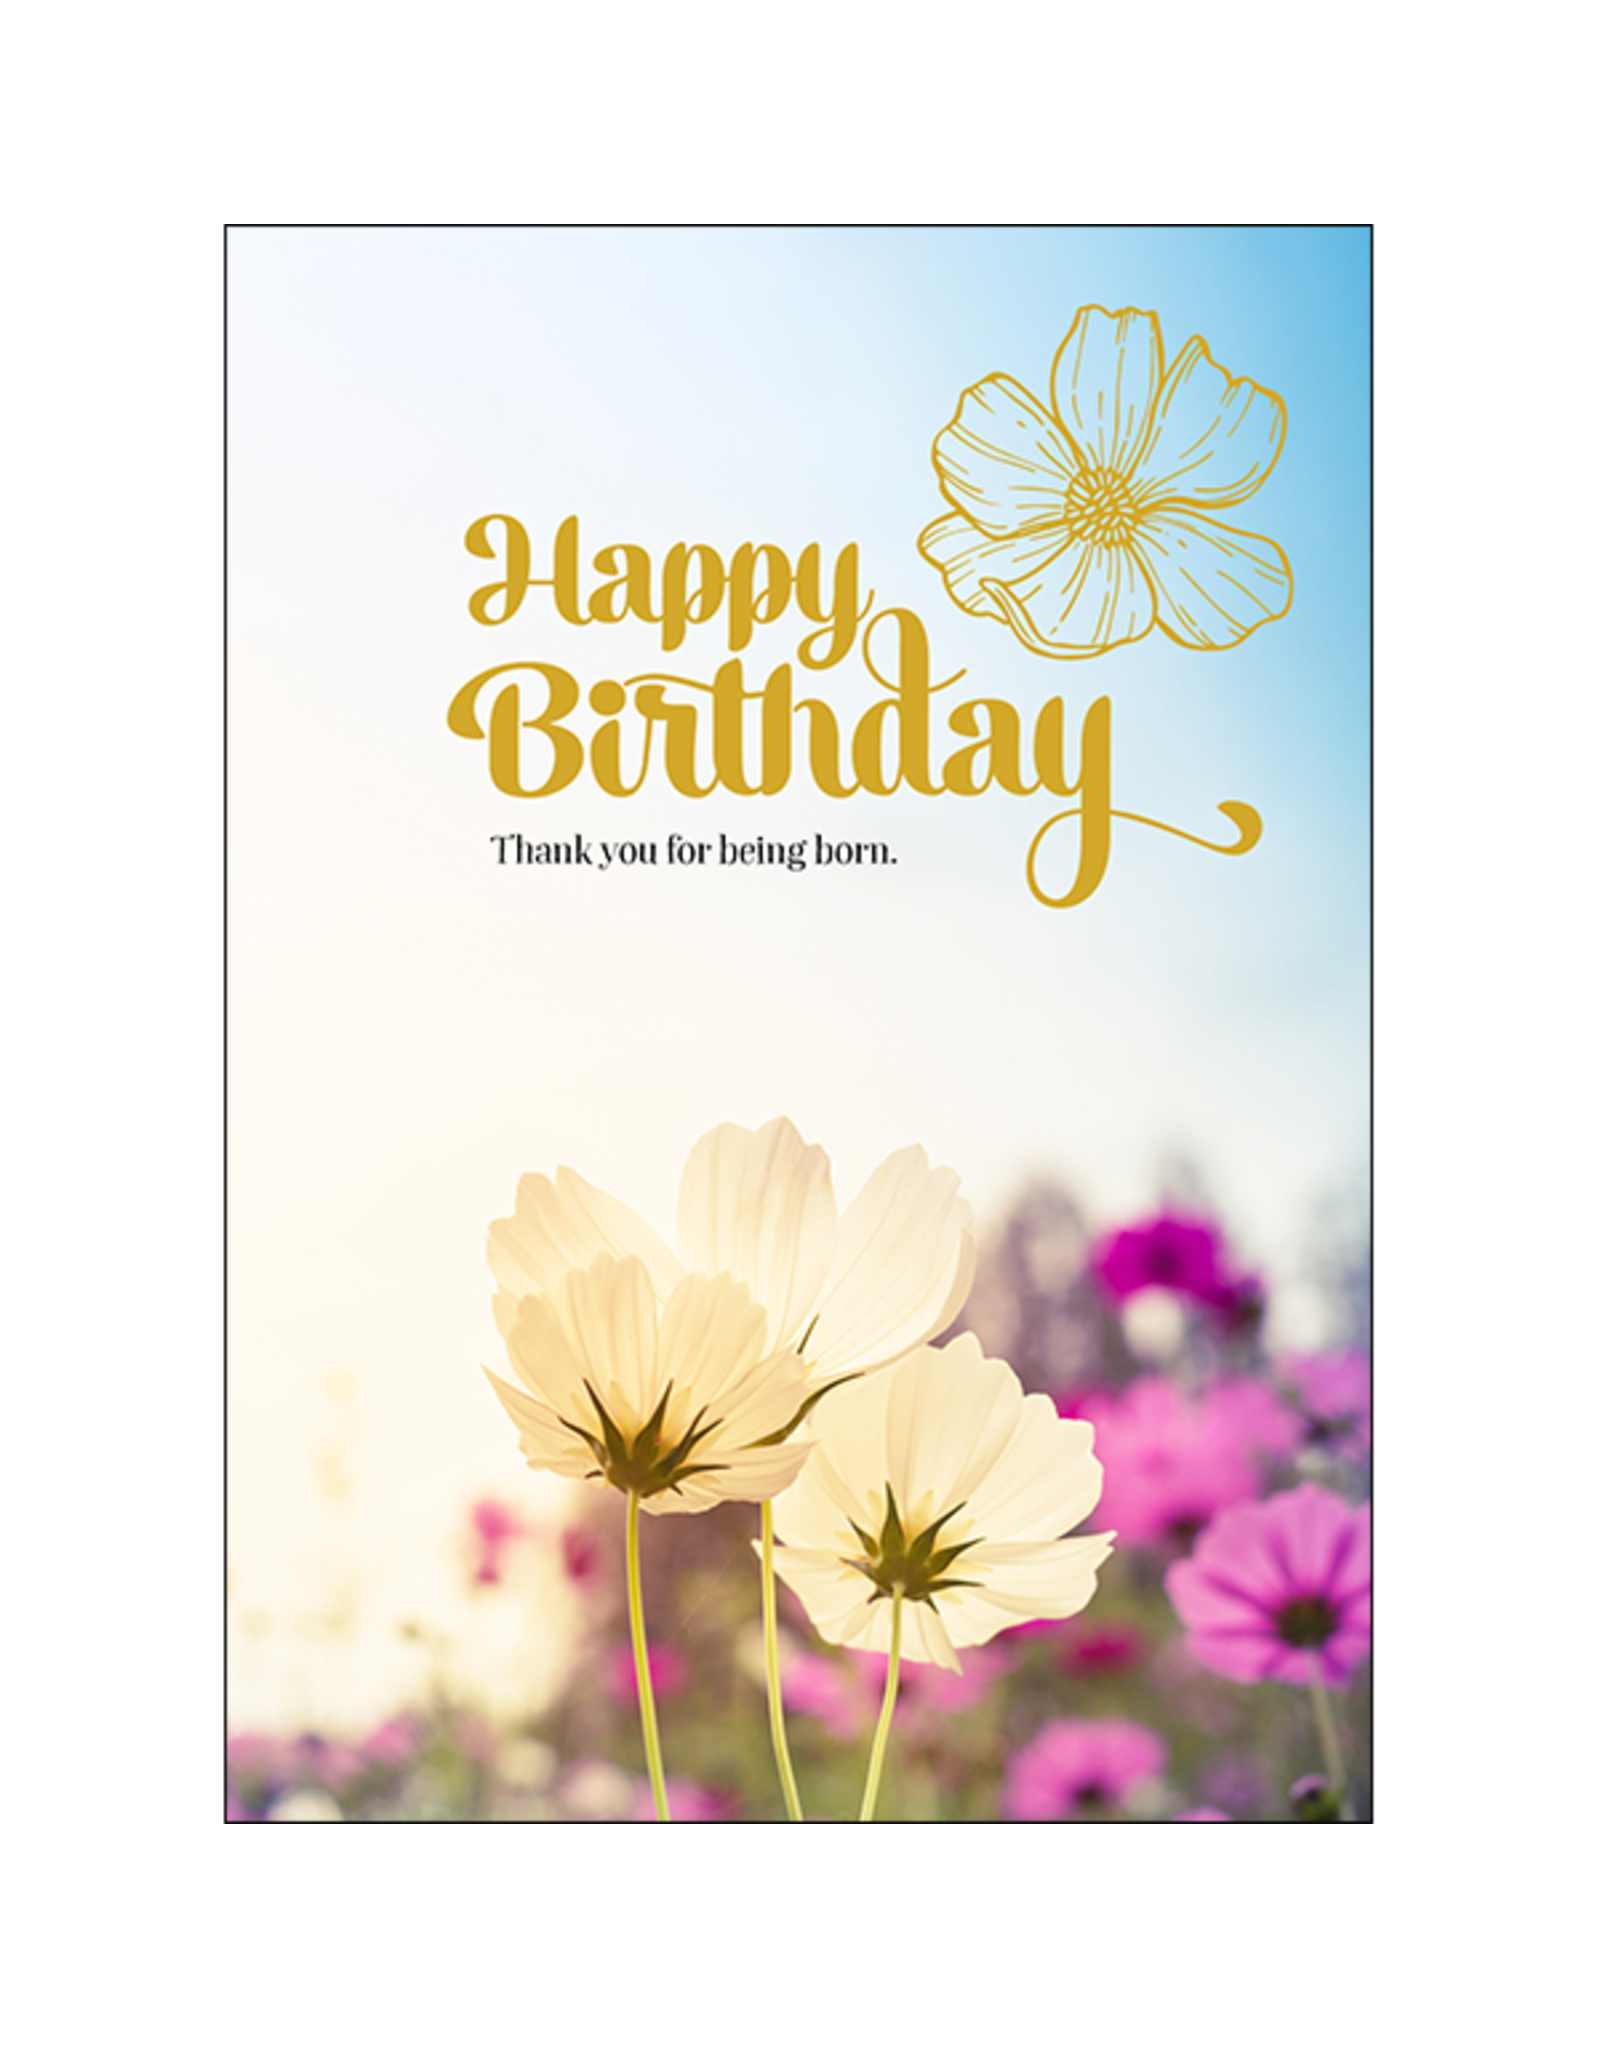 Affirmations Publishing House Inspirational birthday card - Thank you for being born